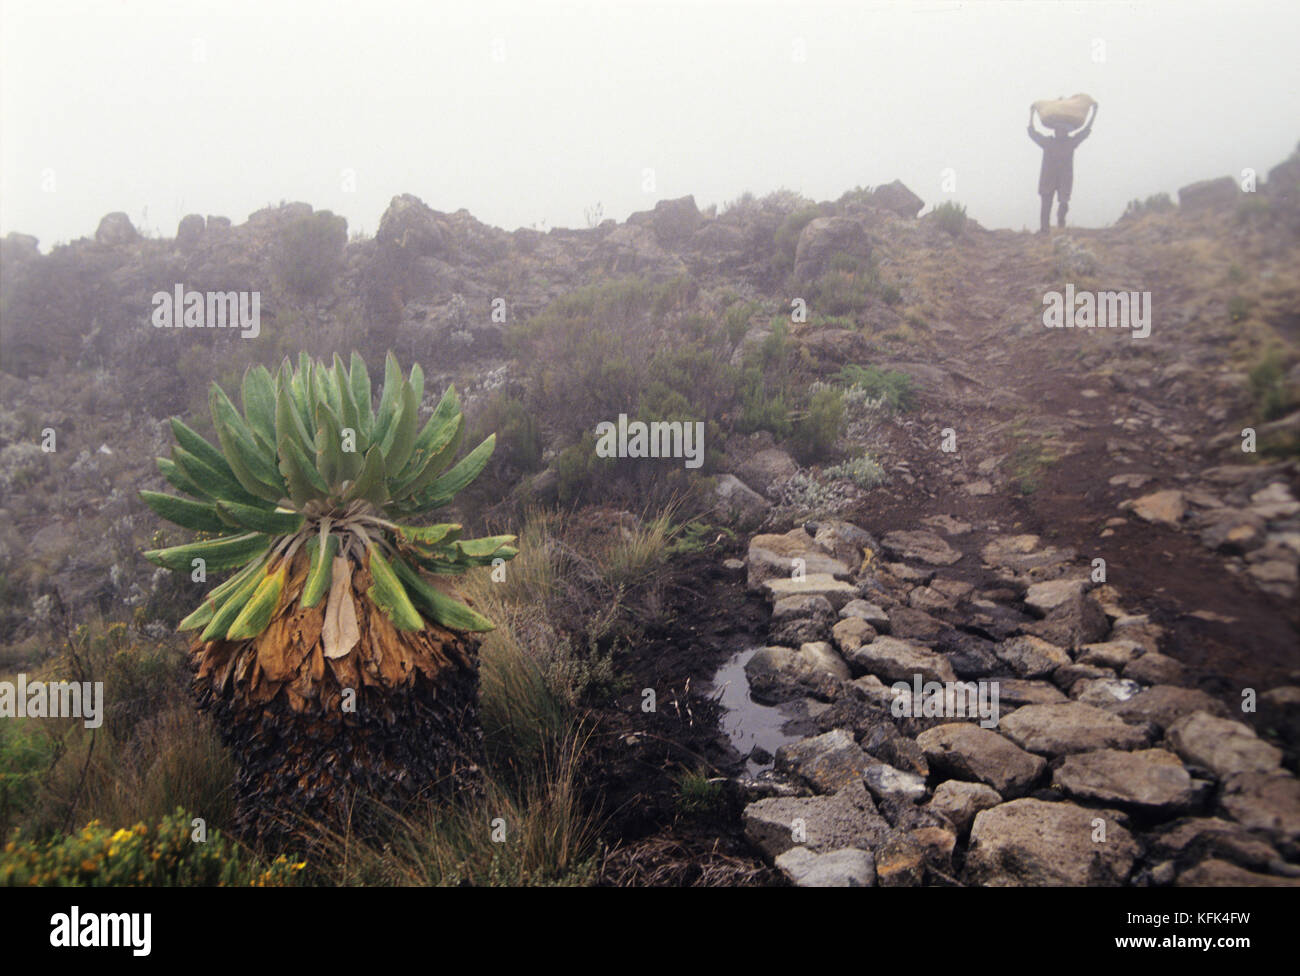 Porter on the path to Mt. Kilimanjaro on a misty morning, a small groundsell can be seen on the left, Tanzania Stock Photo